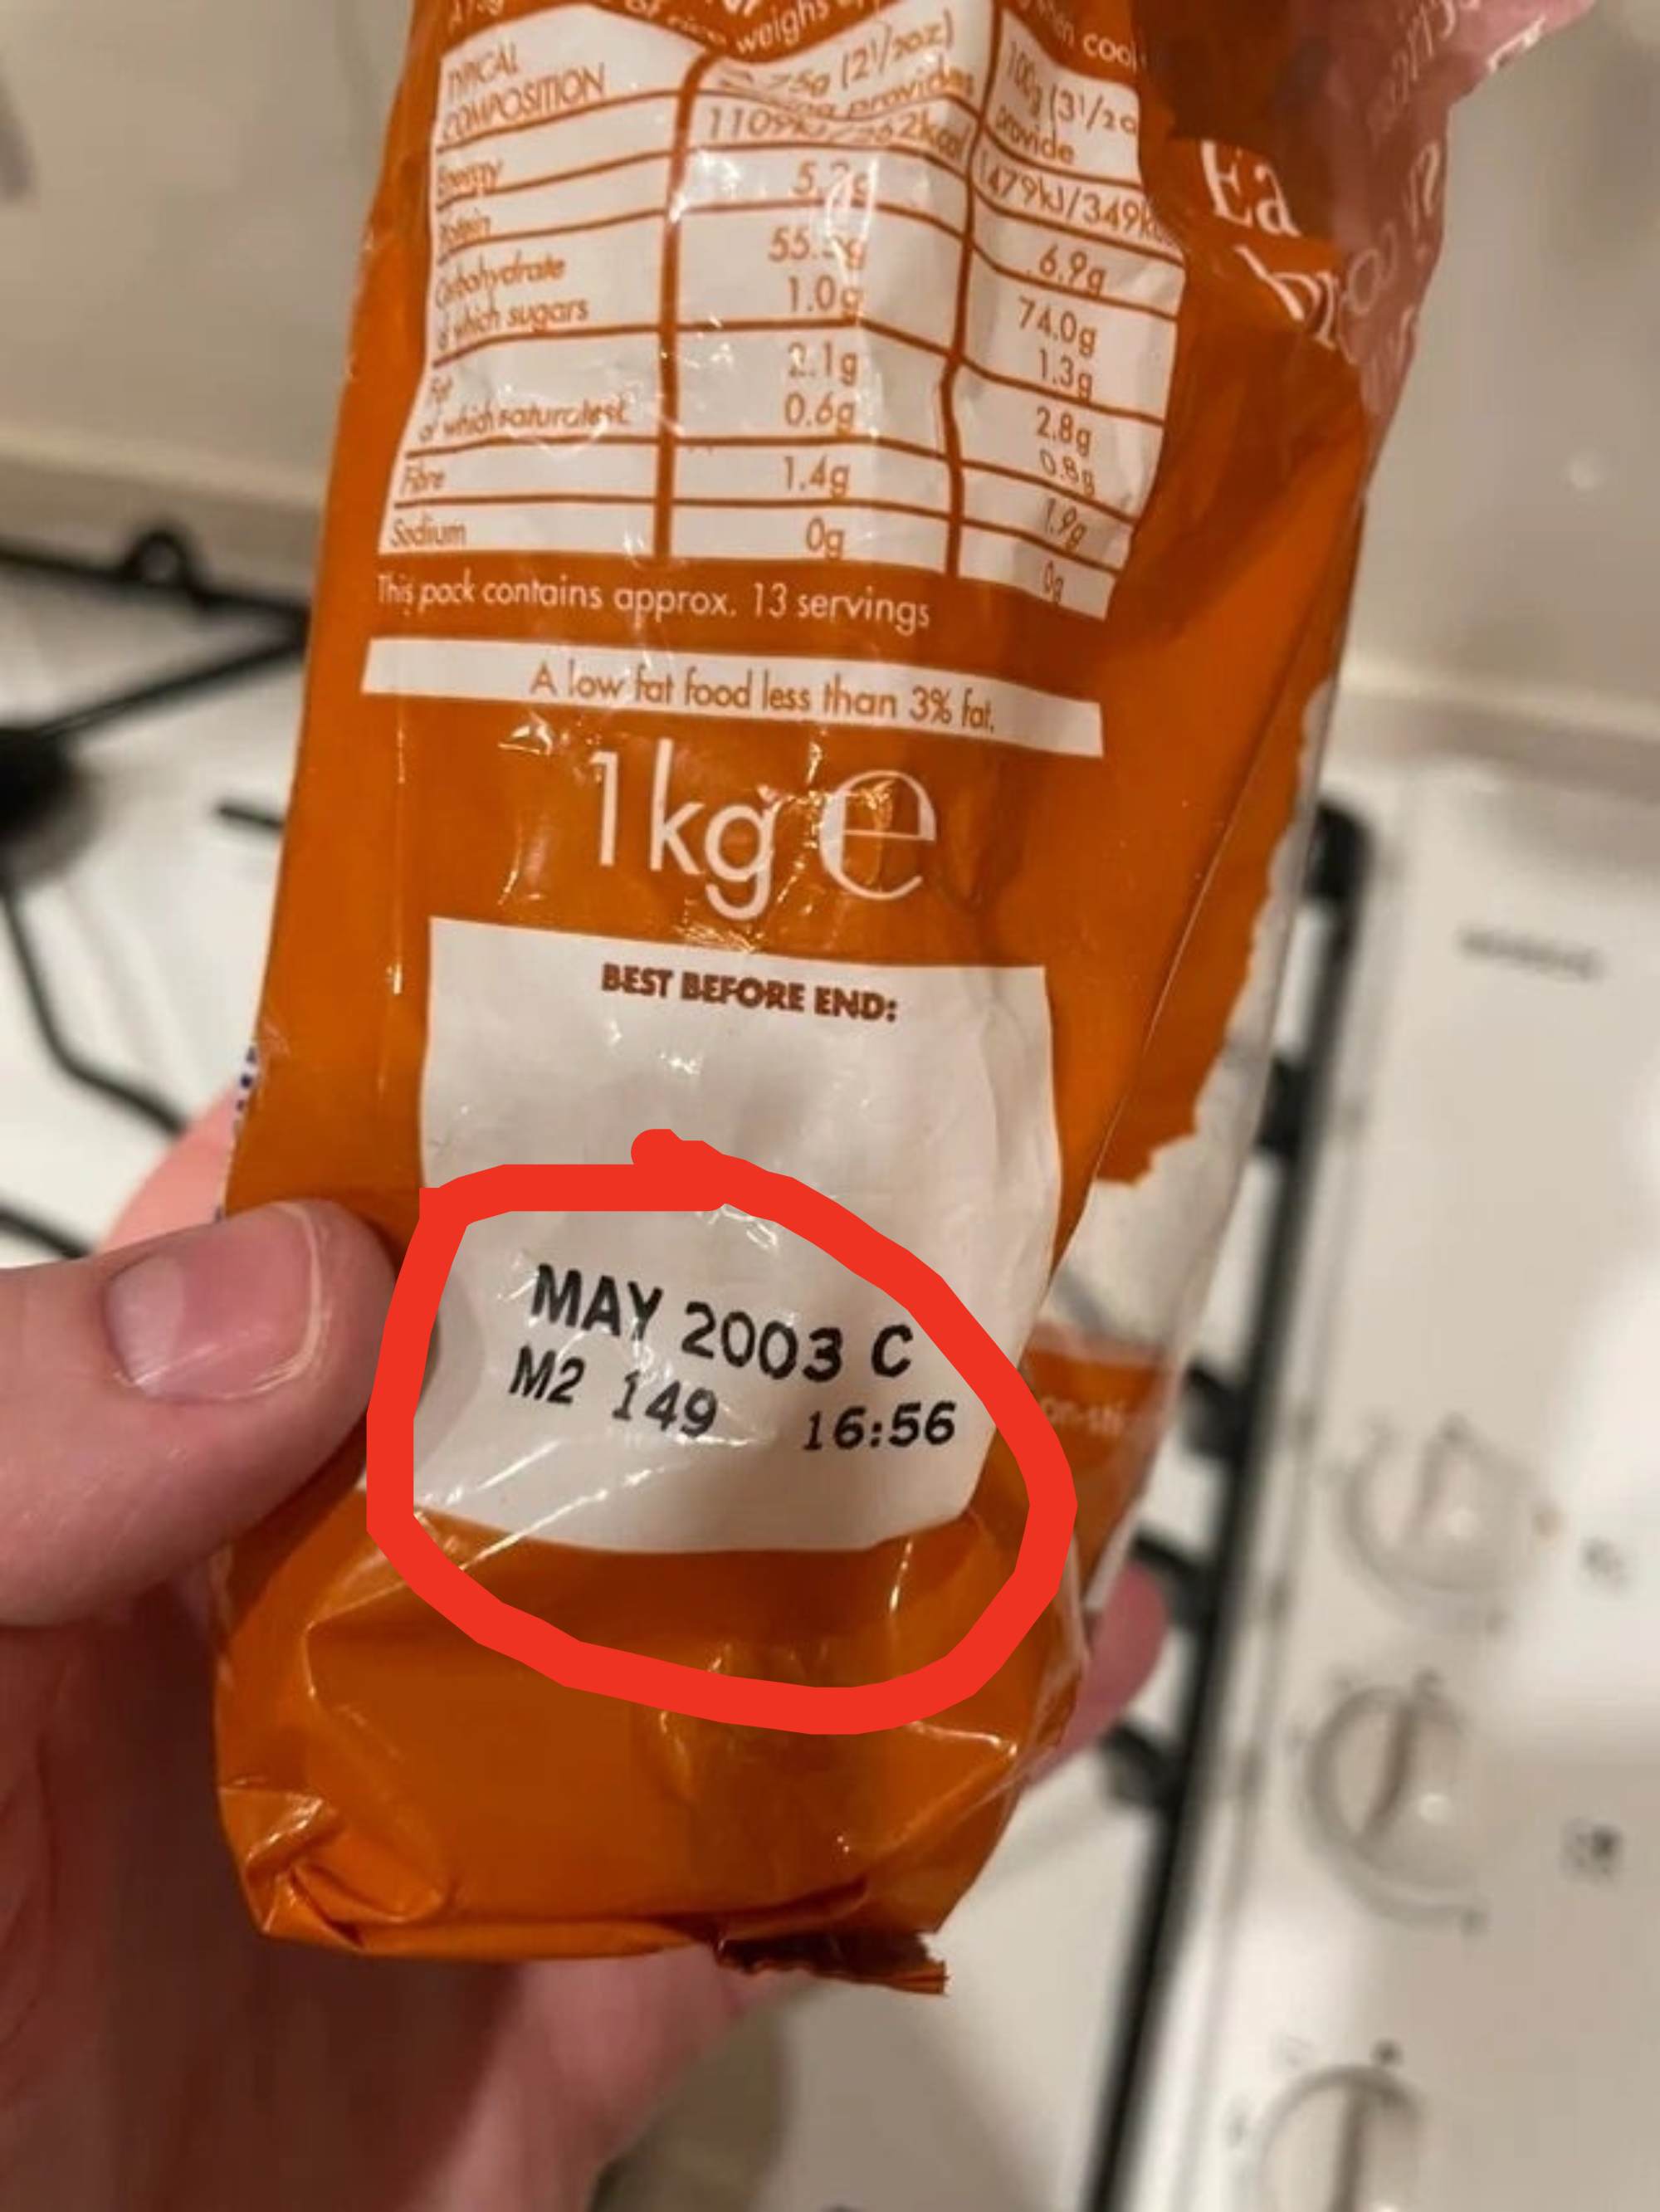 Someone holding a bag showing an expiration date of May 2003